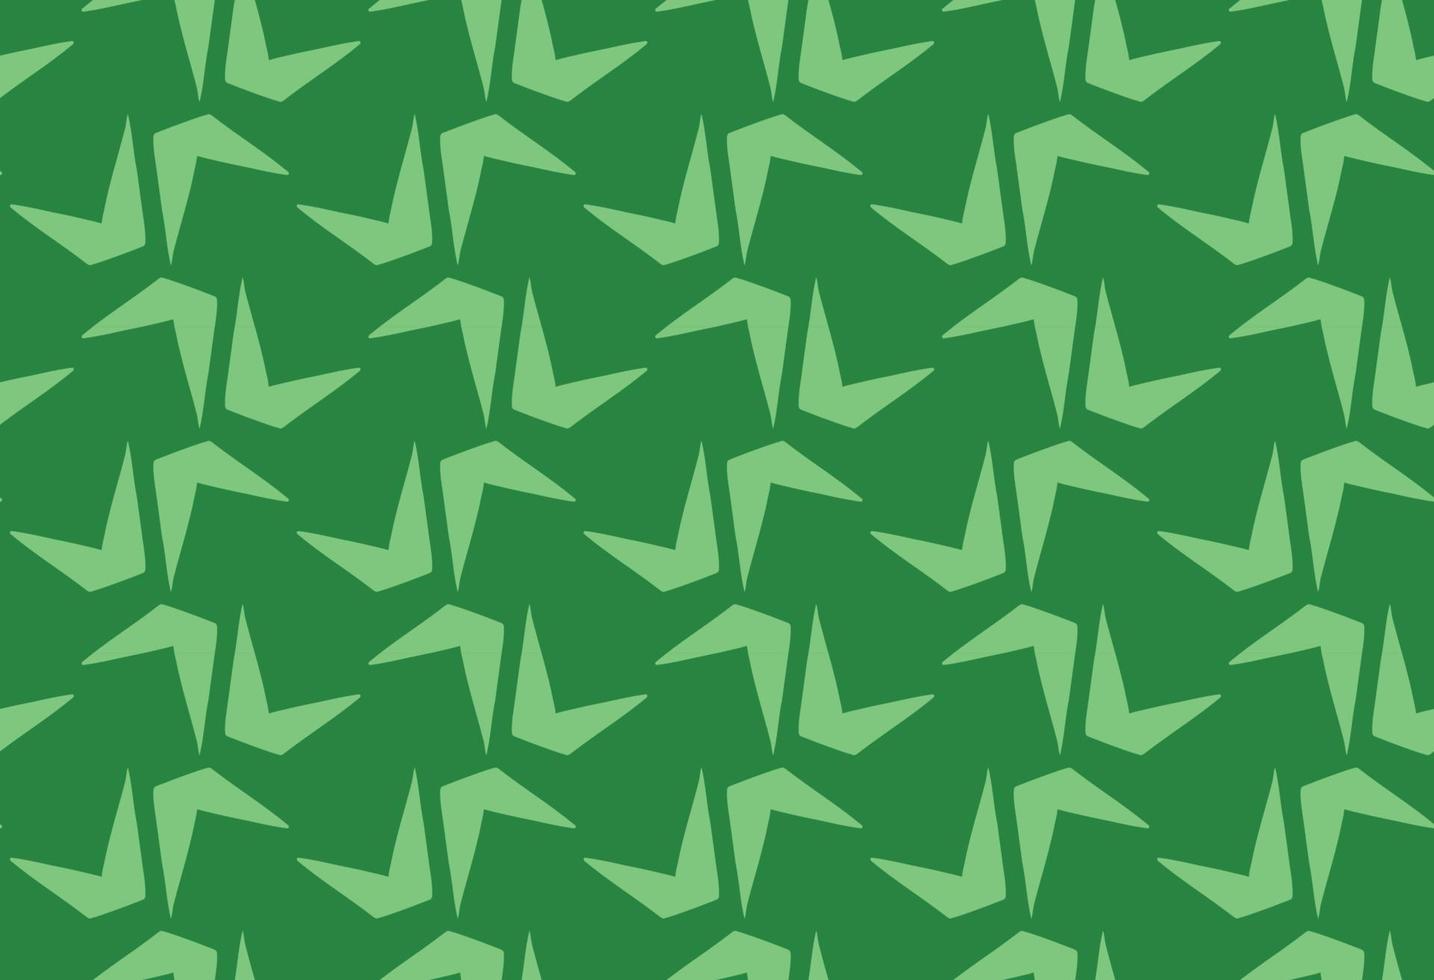 Vector texture background, seamless pattern. Hand drawn, green colors.